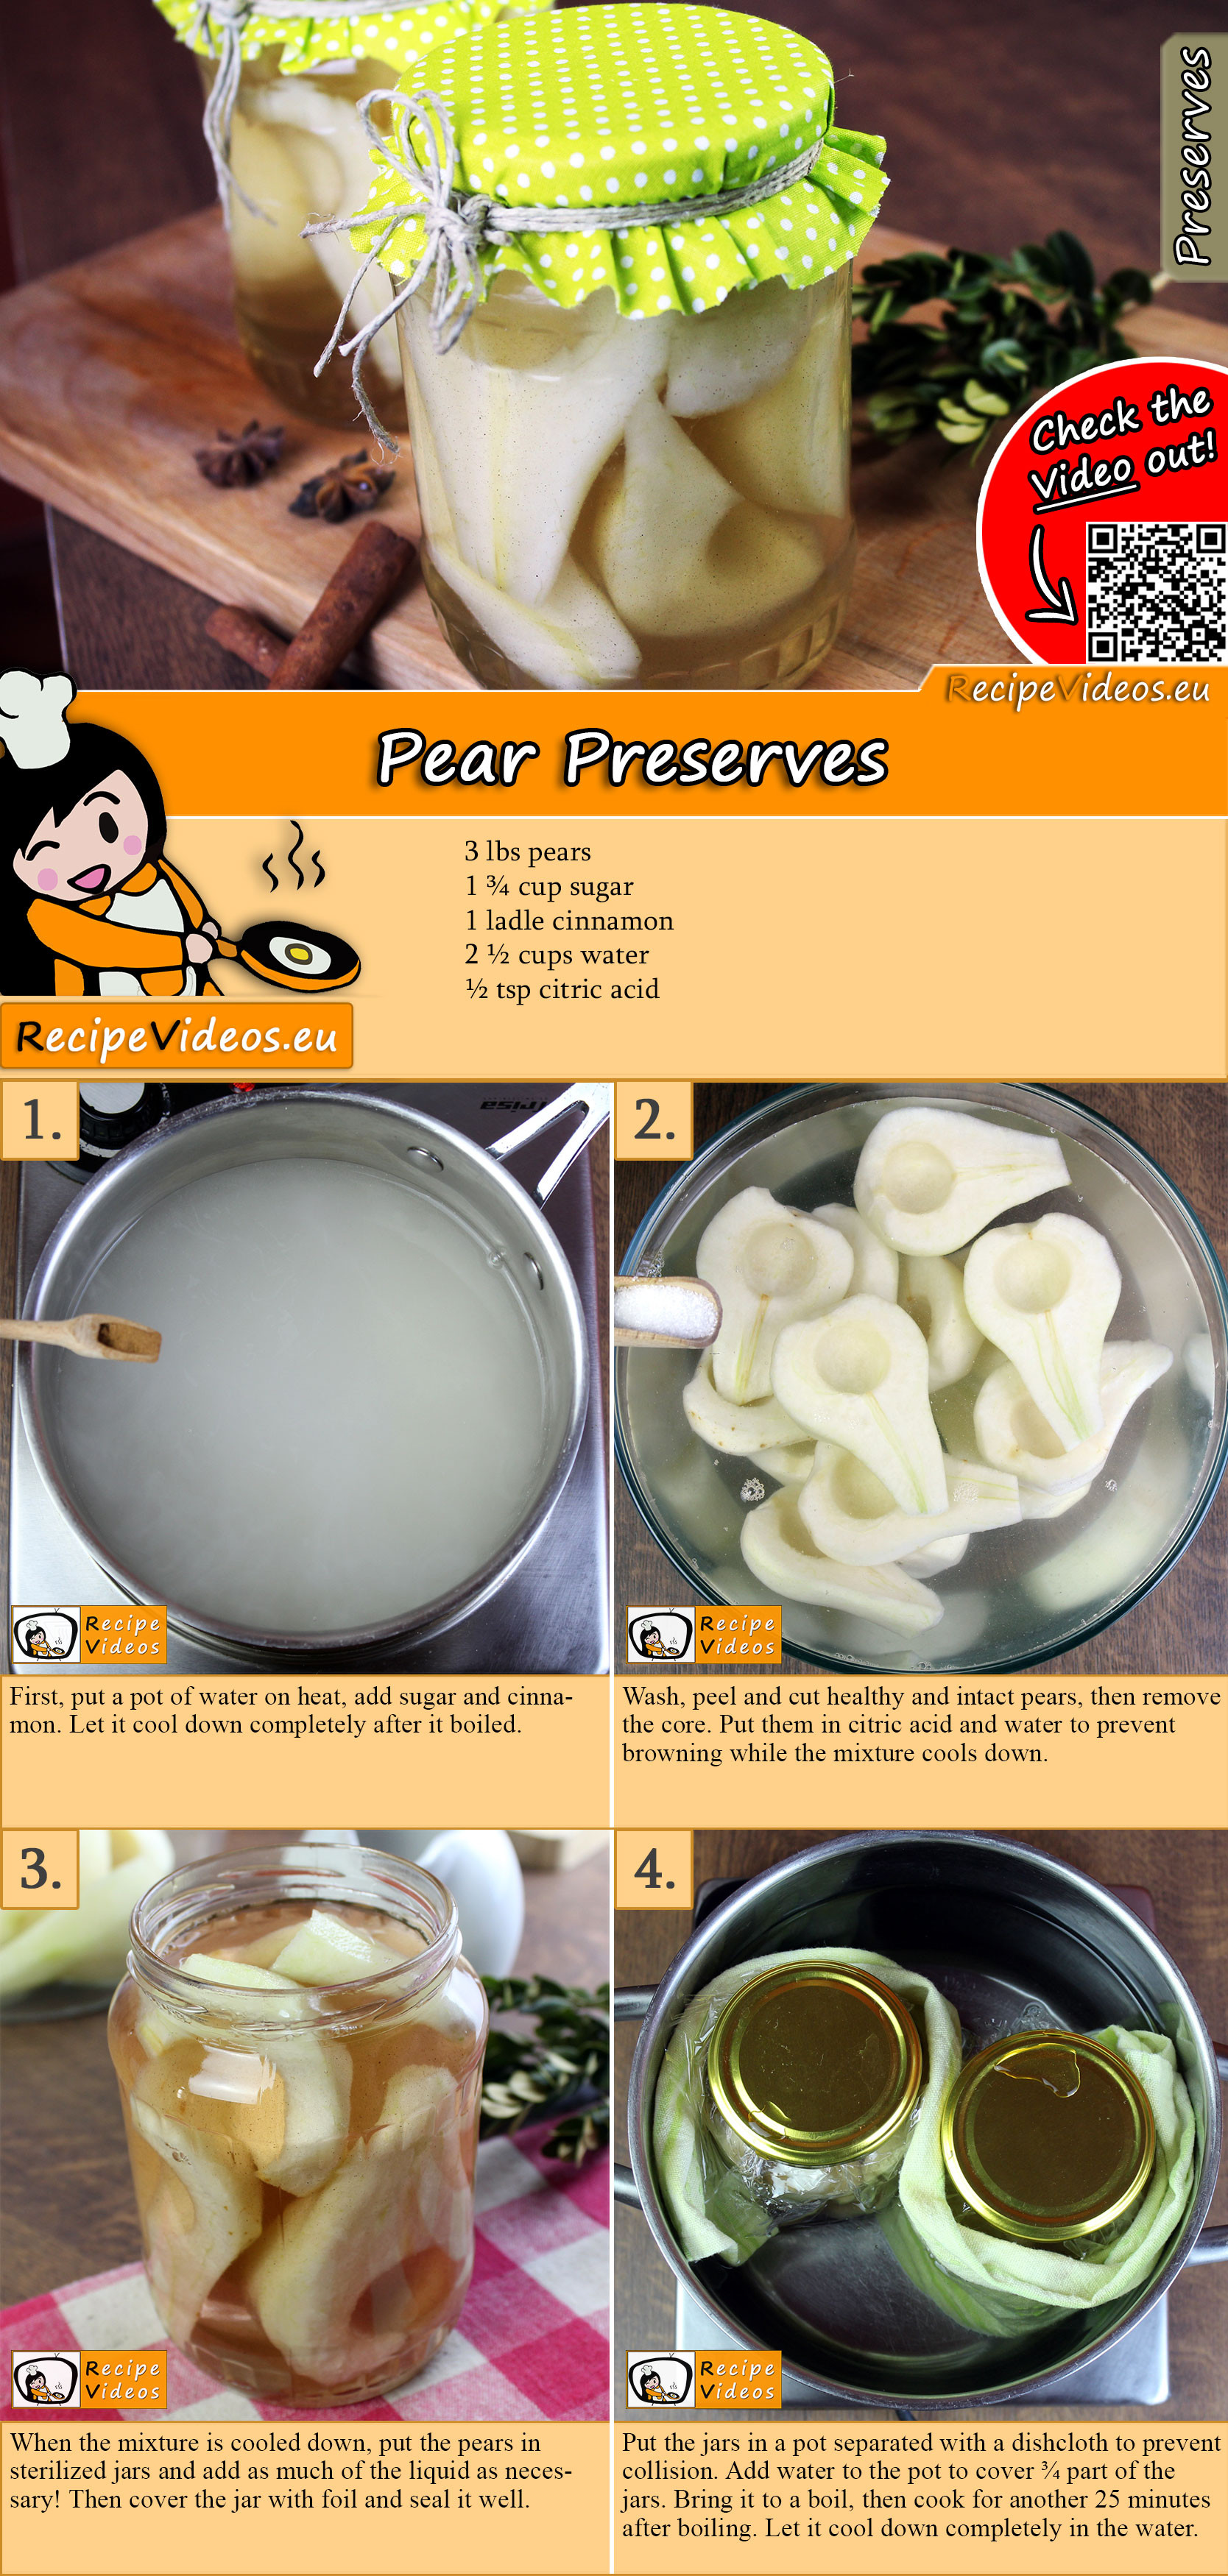 Pear Preserves recipe with video